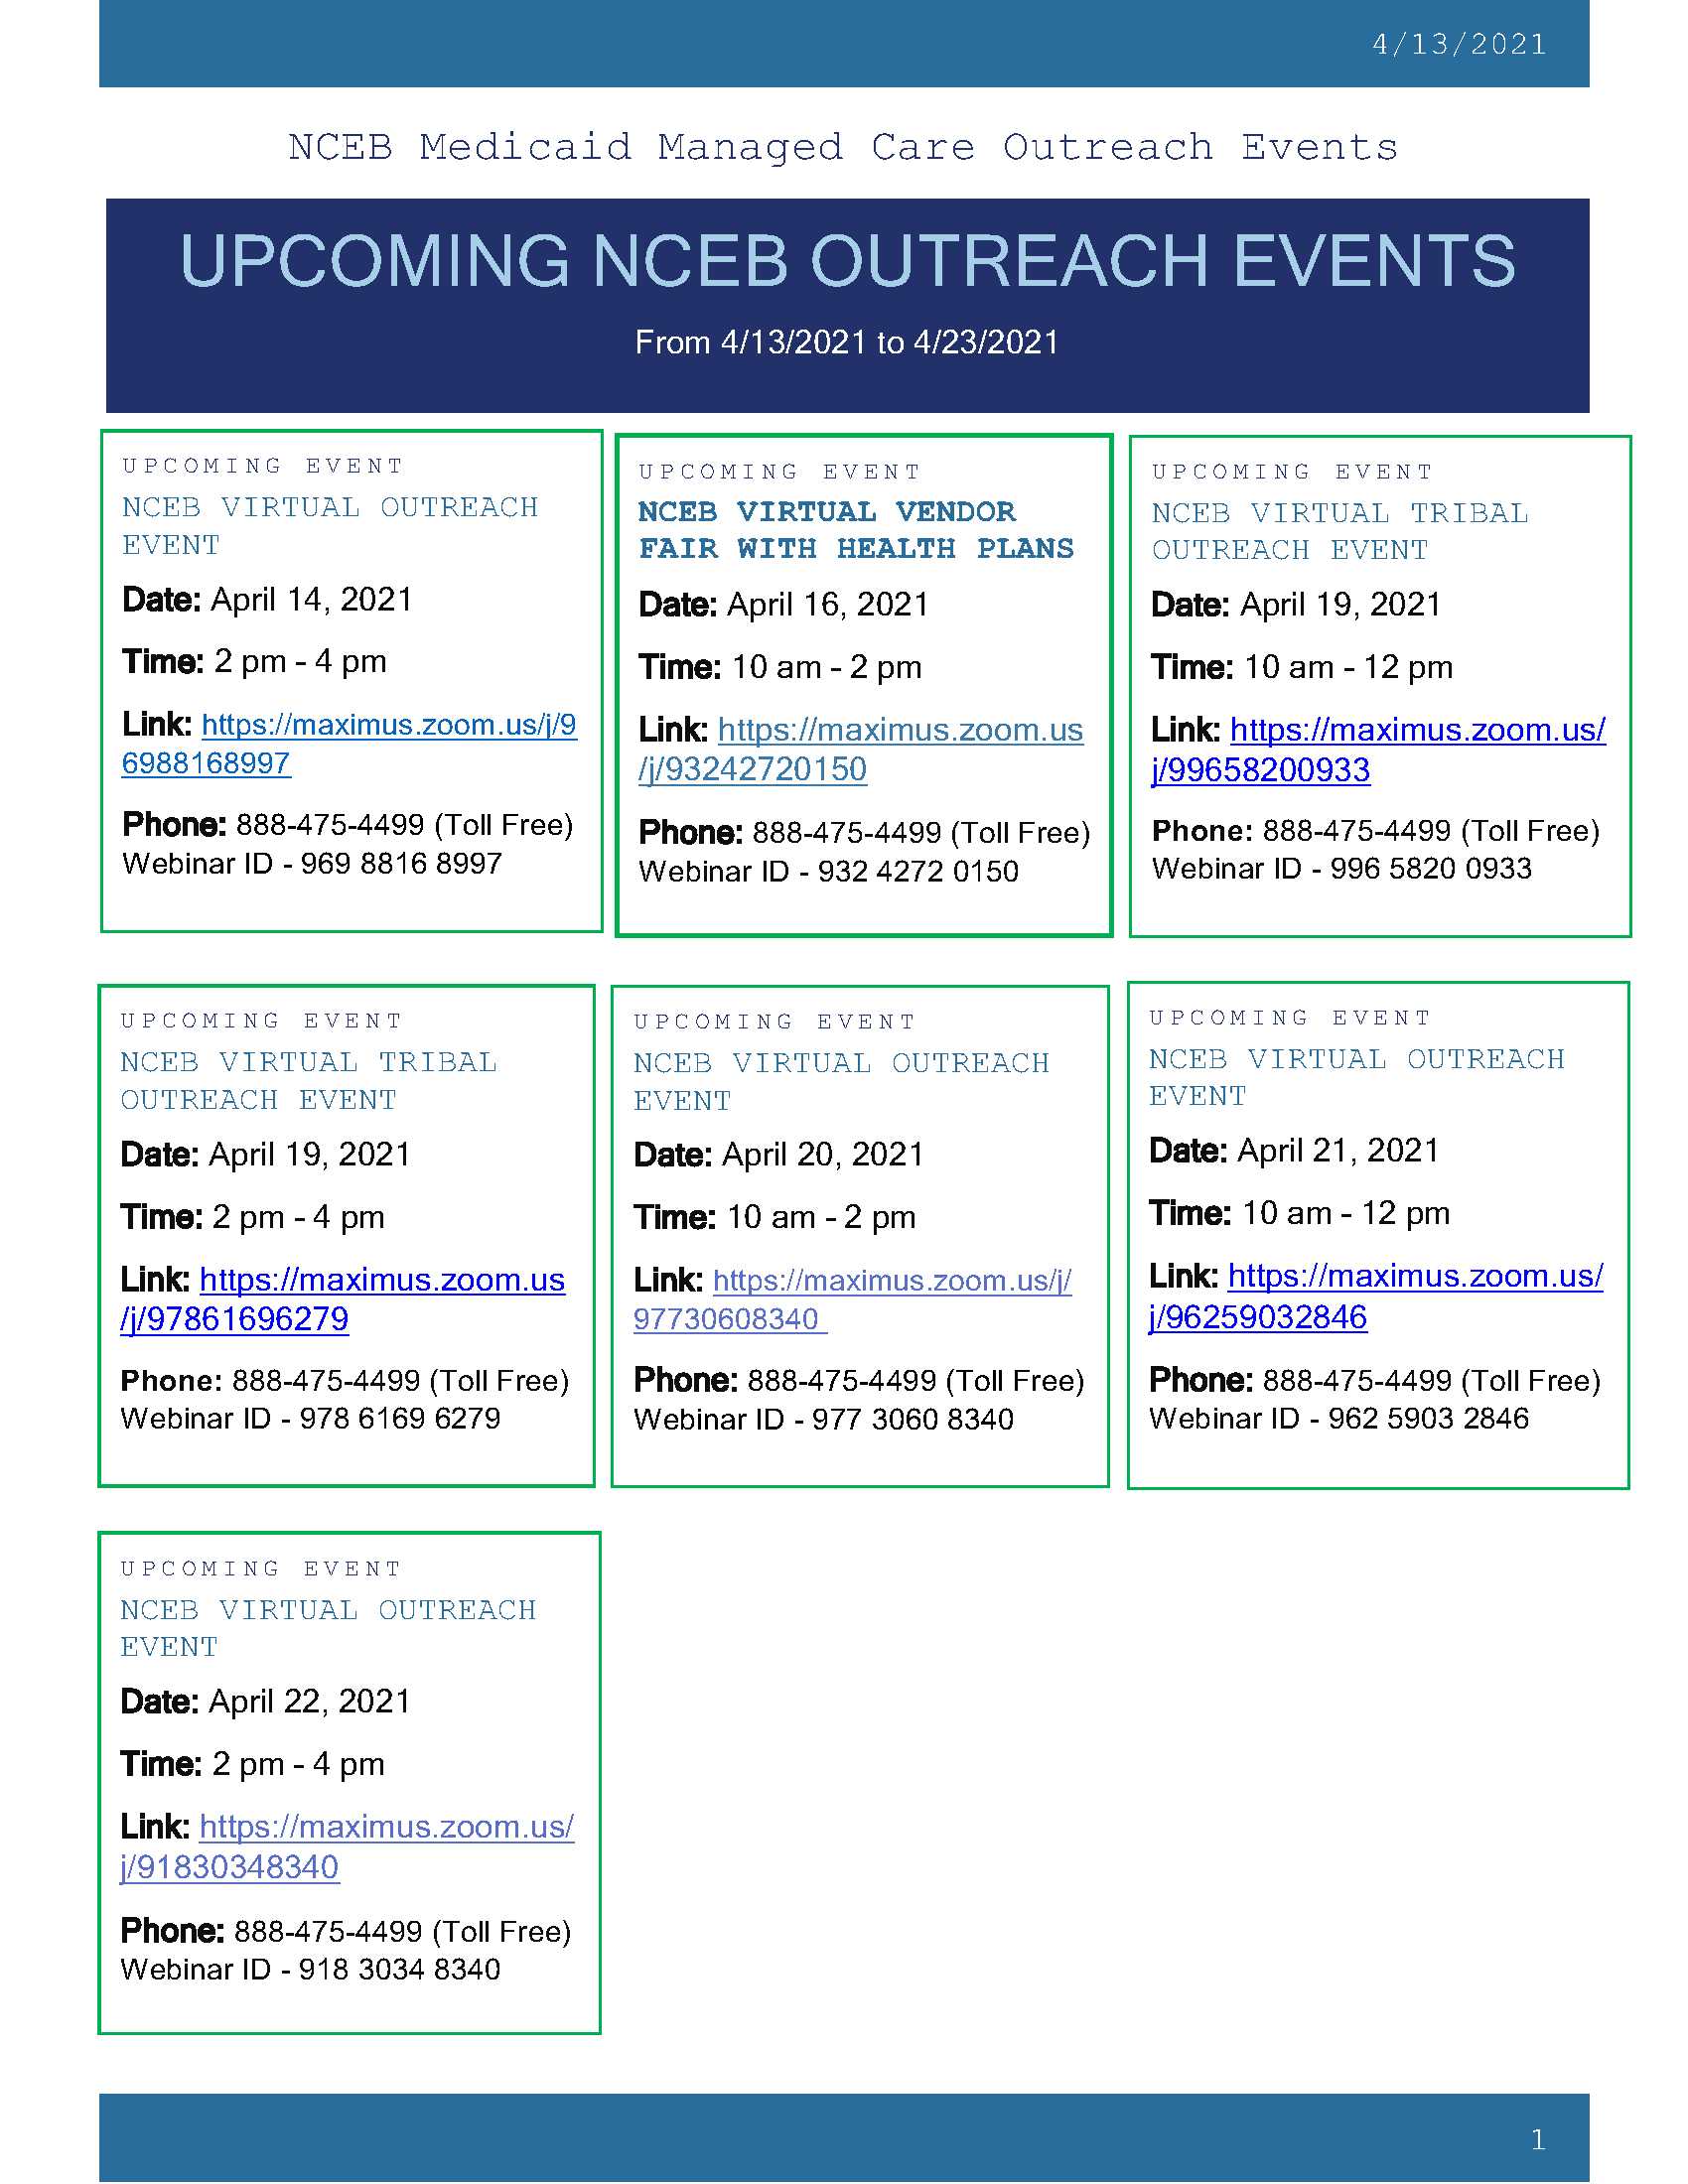 NCEB COUNTY OUTREACH EVENTS 4.13.2021